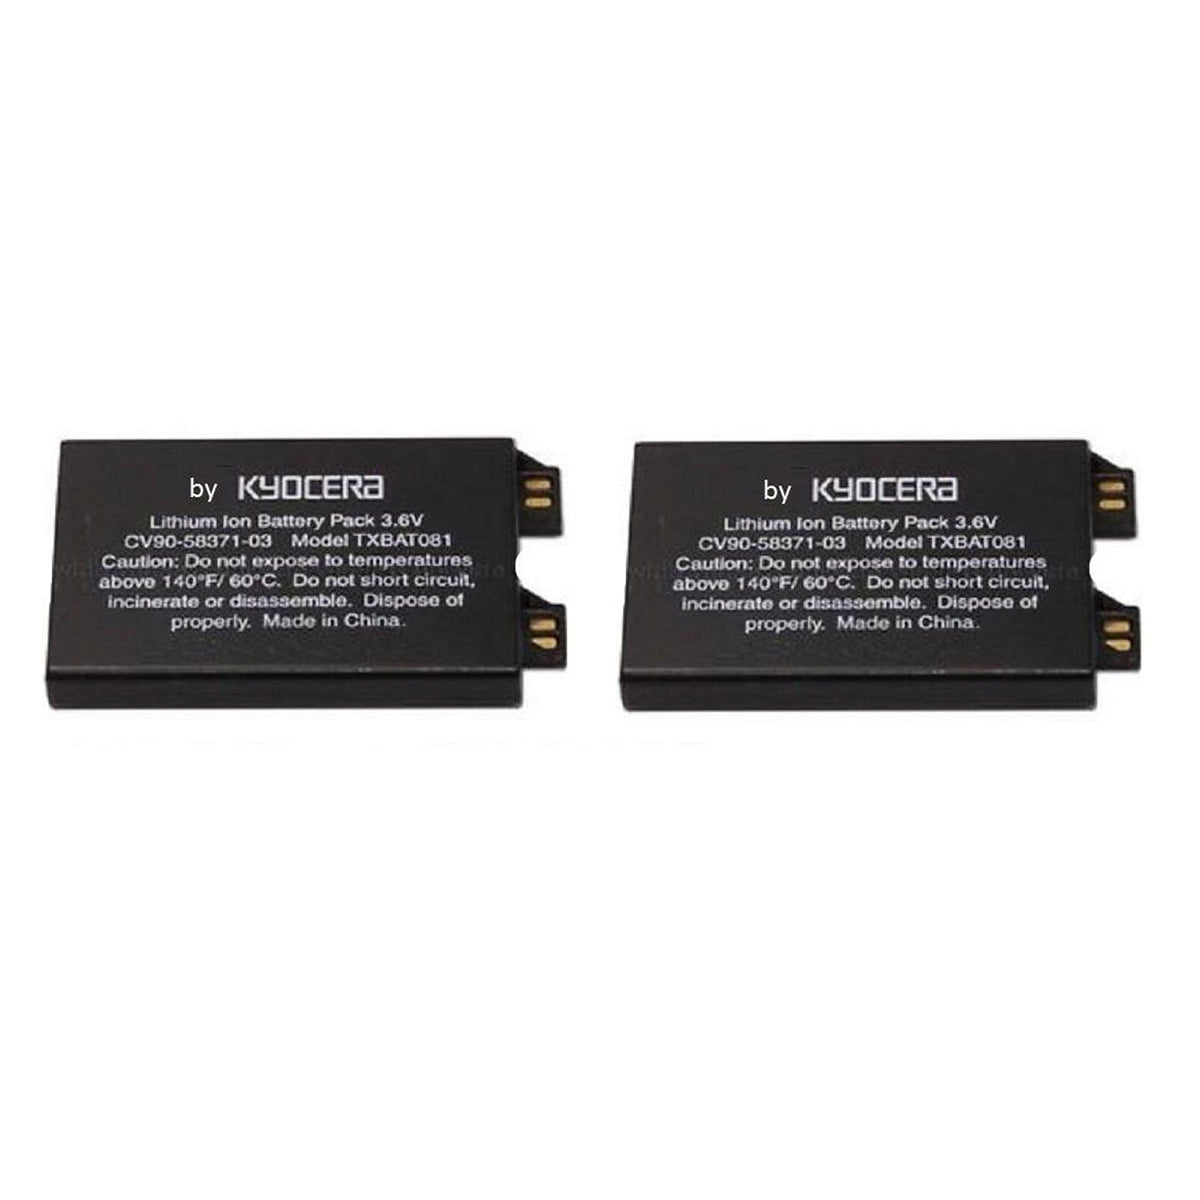 KIT 2x OEM Kyocera TXBAT081 800 mAh Replacement Battery for Kyocera Phones Cell Phone - Batteries Kyocera    - Simple Cell Bulk Wholesale Pricing - USA Seller